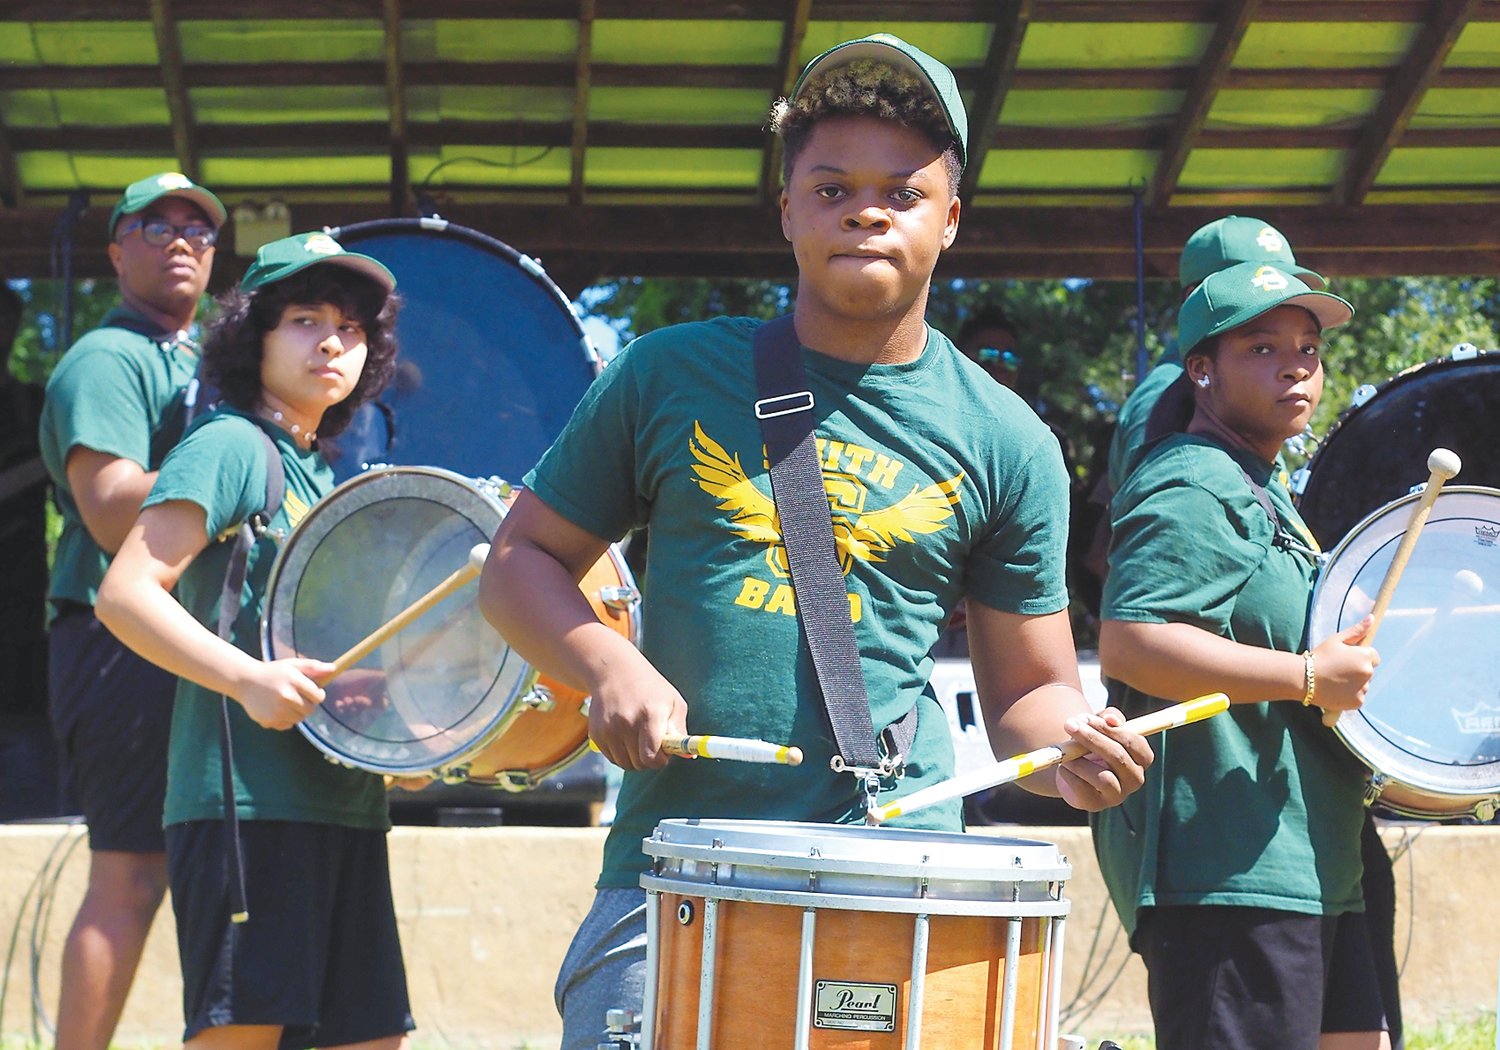 The drum line and dance team from the Ben L. Smith High School in Greensboro entertained the crowd with a powerful performance on Saturday at the Chatham Co. Fairgrounds in Pittsboro. One of the goals of Juneteenth Pittsboro is to bring together local and regional talent.